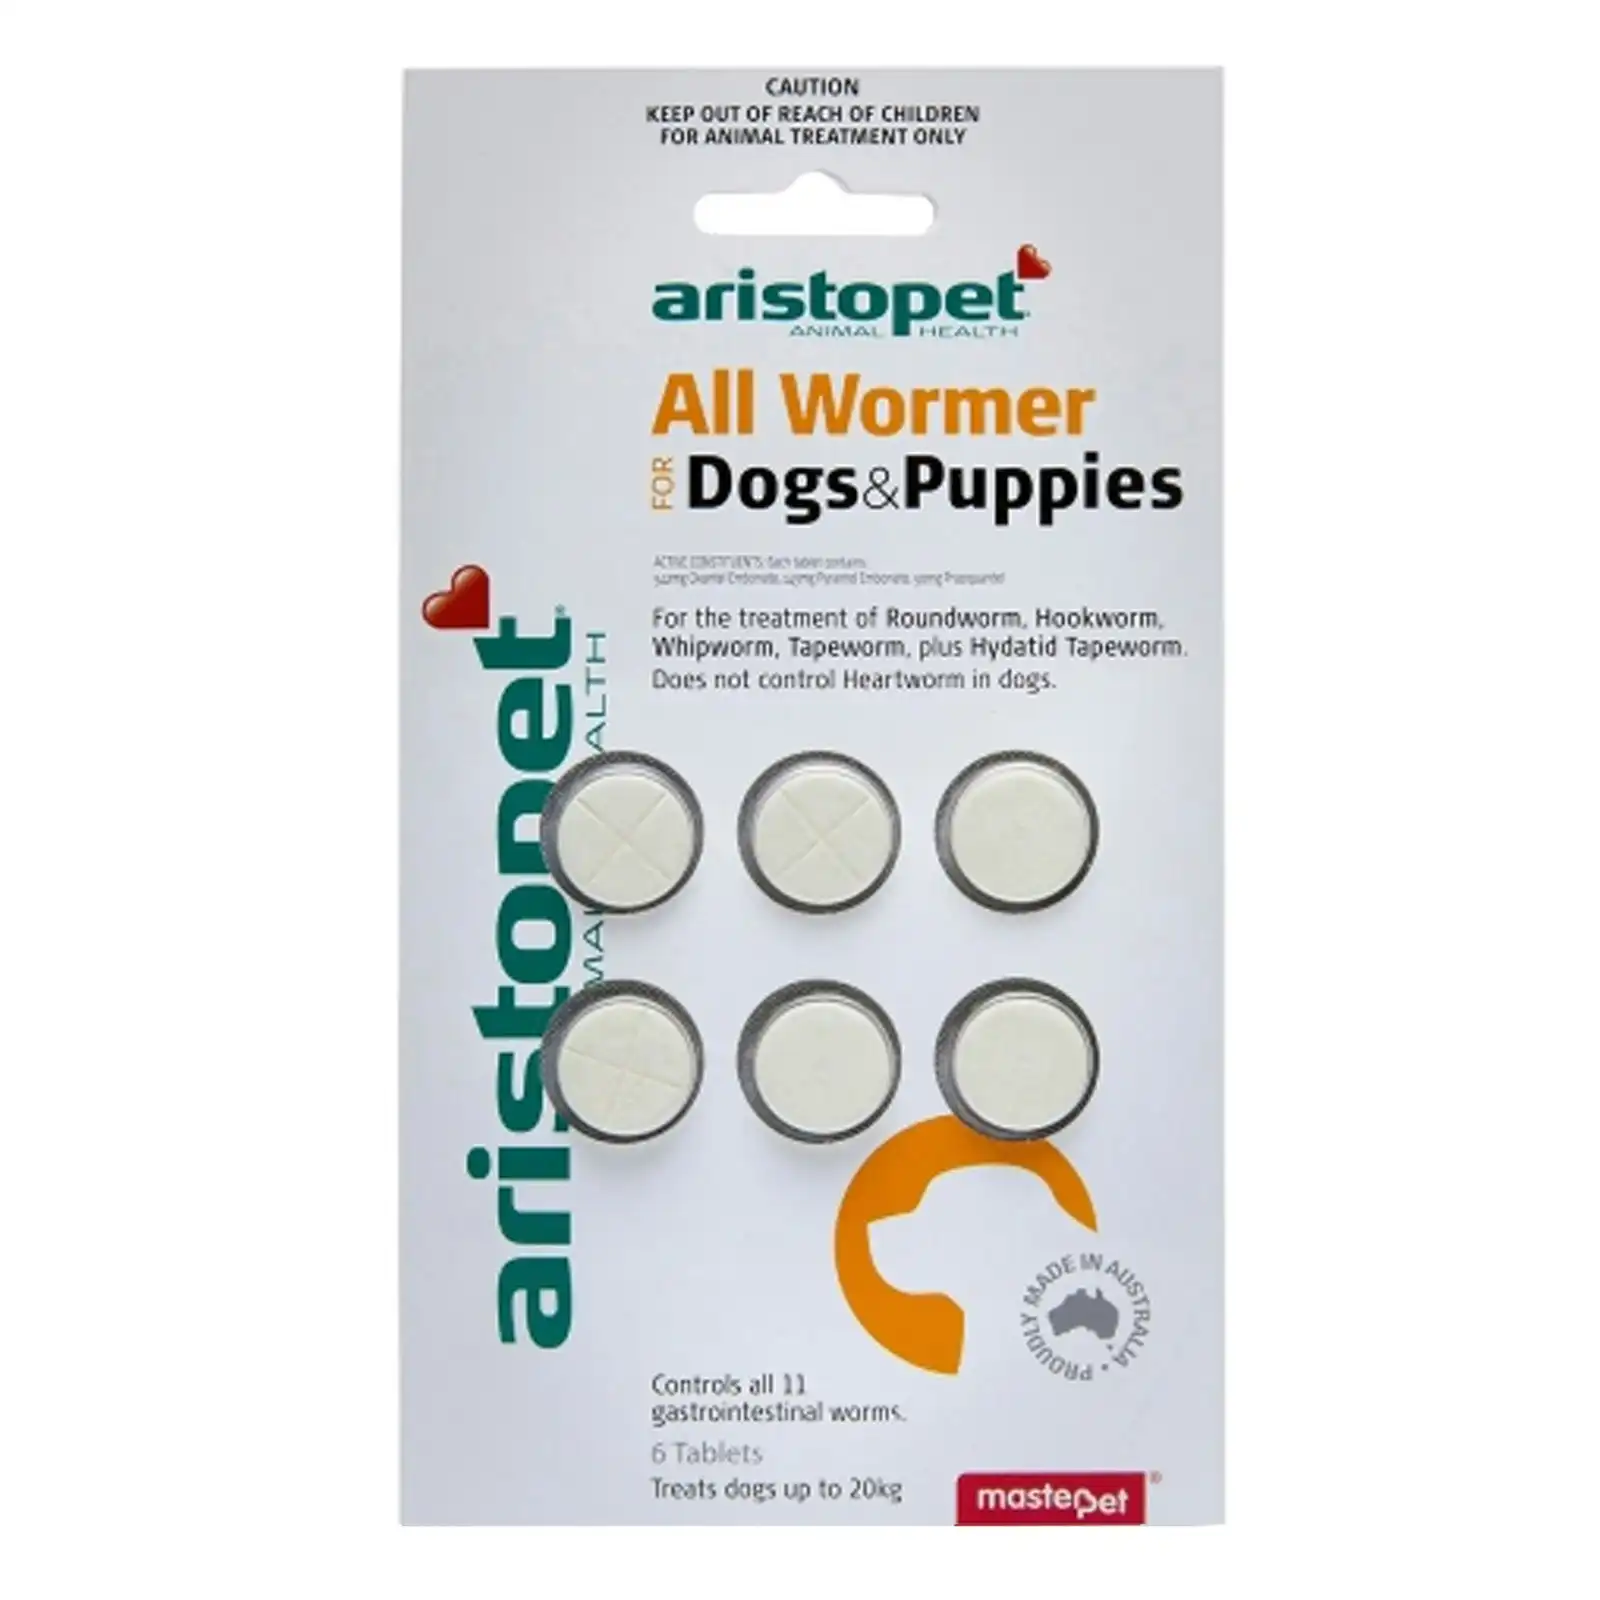 Aristopet Allwormer For Dogs and Puppies 10 Kg 6 Tablets